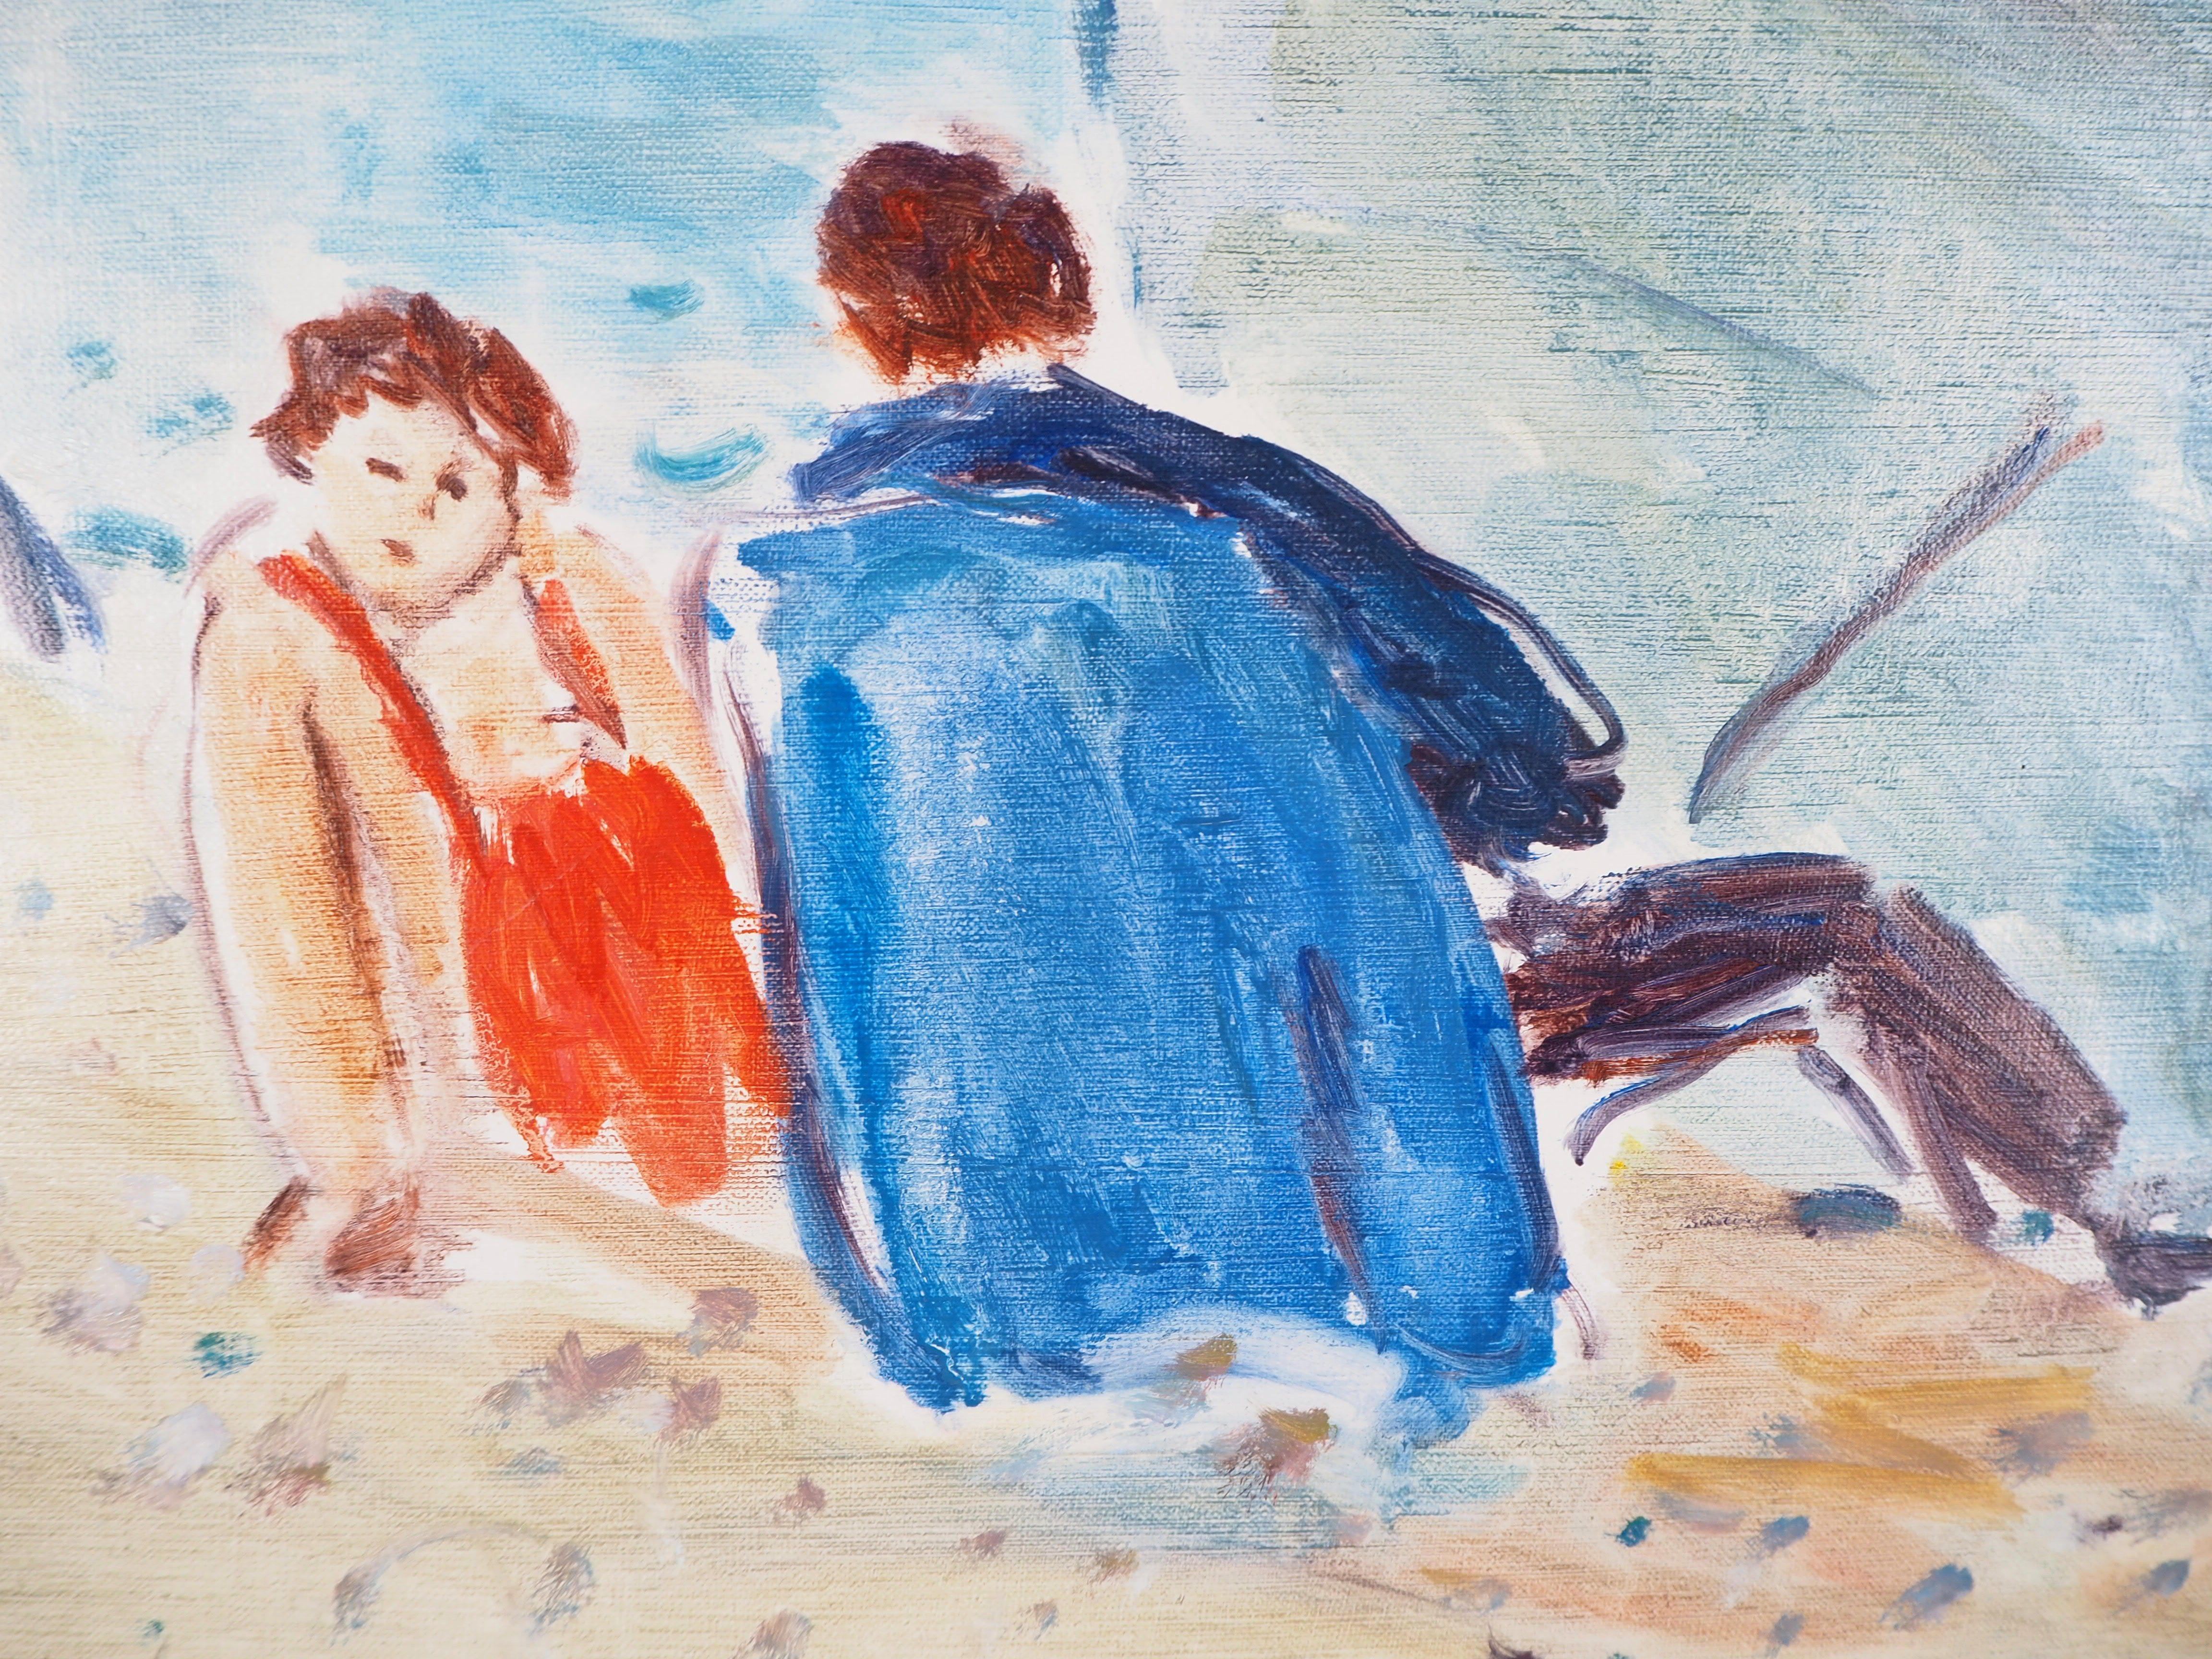 Normandy : Sunny Day in Dieppe - Original Oil On Canvas,  Hansigned - Brown Figurative Painting by Jean Jacques Rene